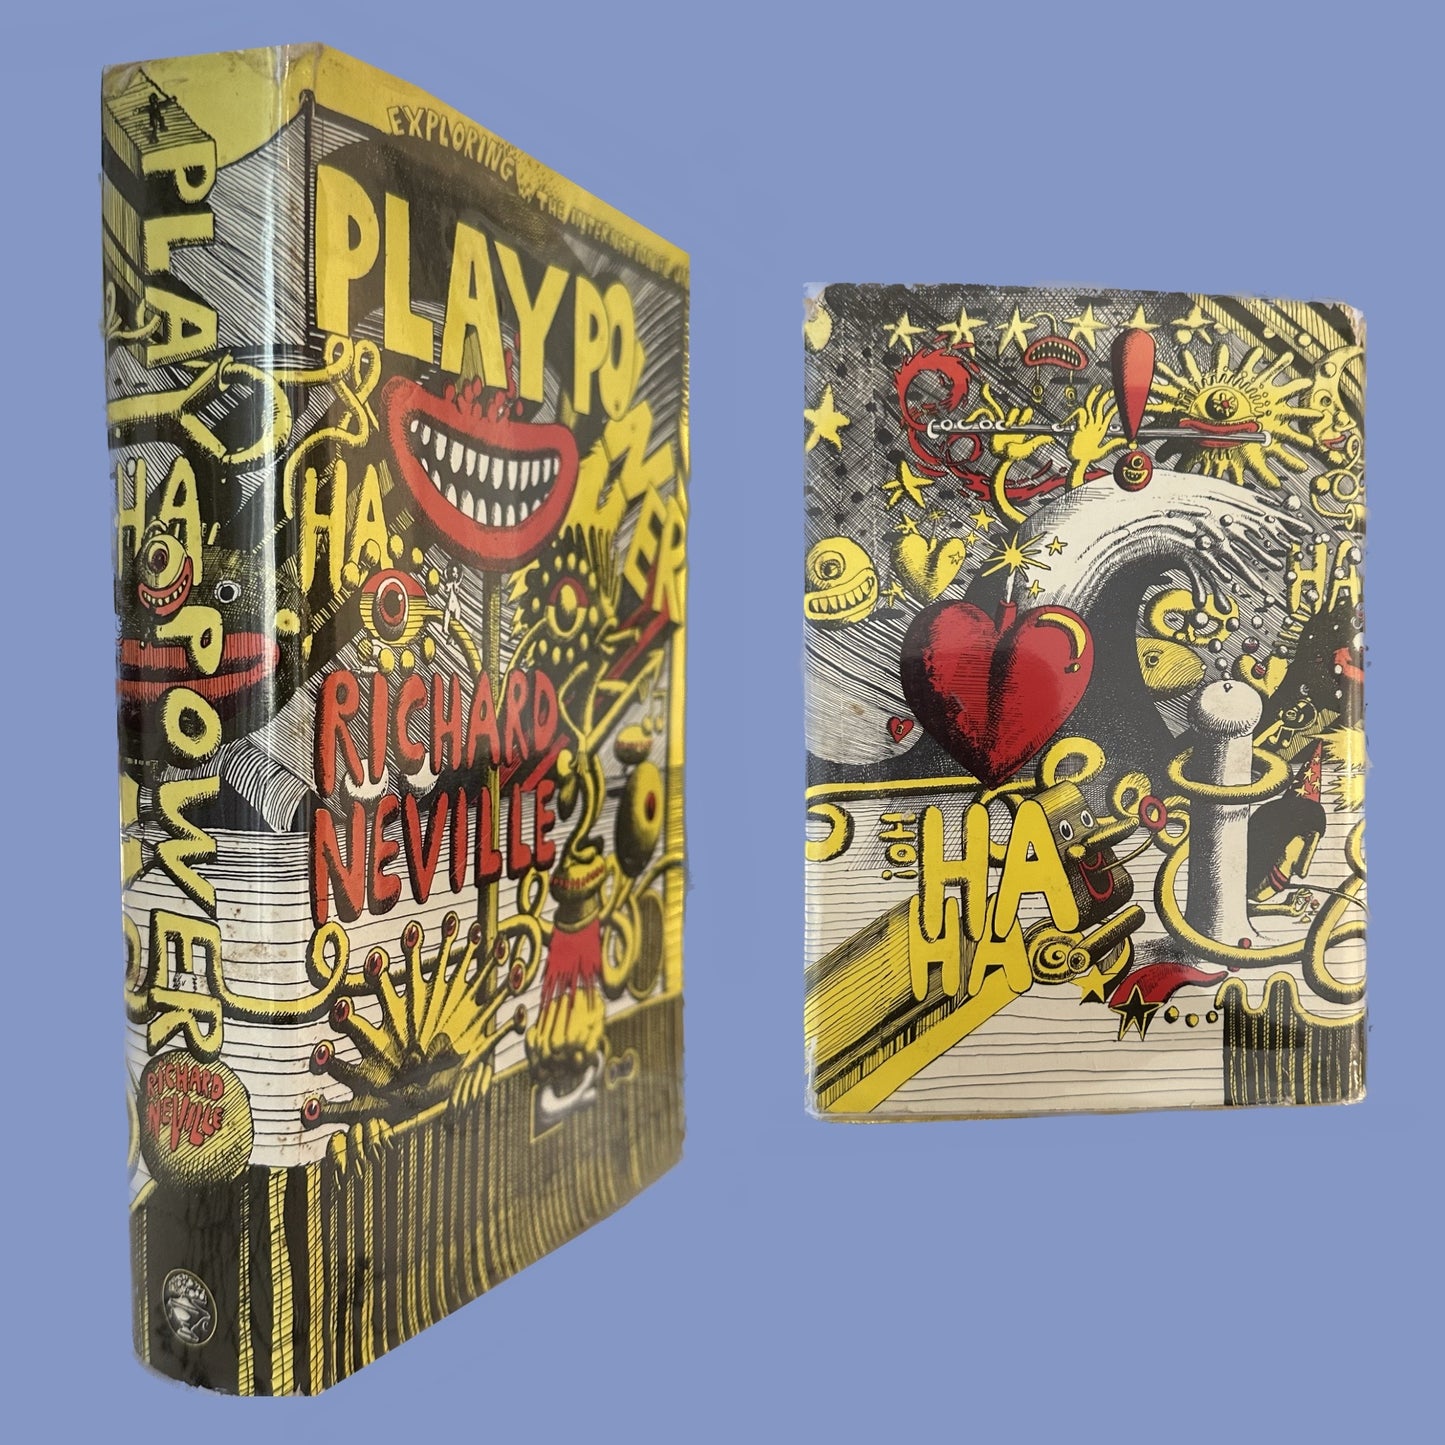 Play Power by Richard Neville, 1970